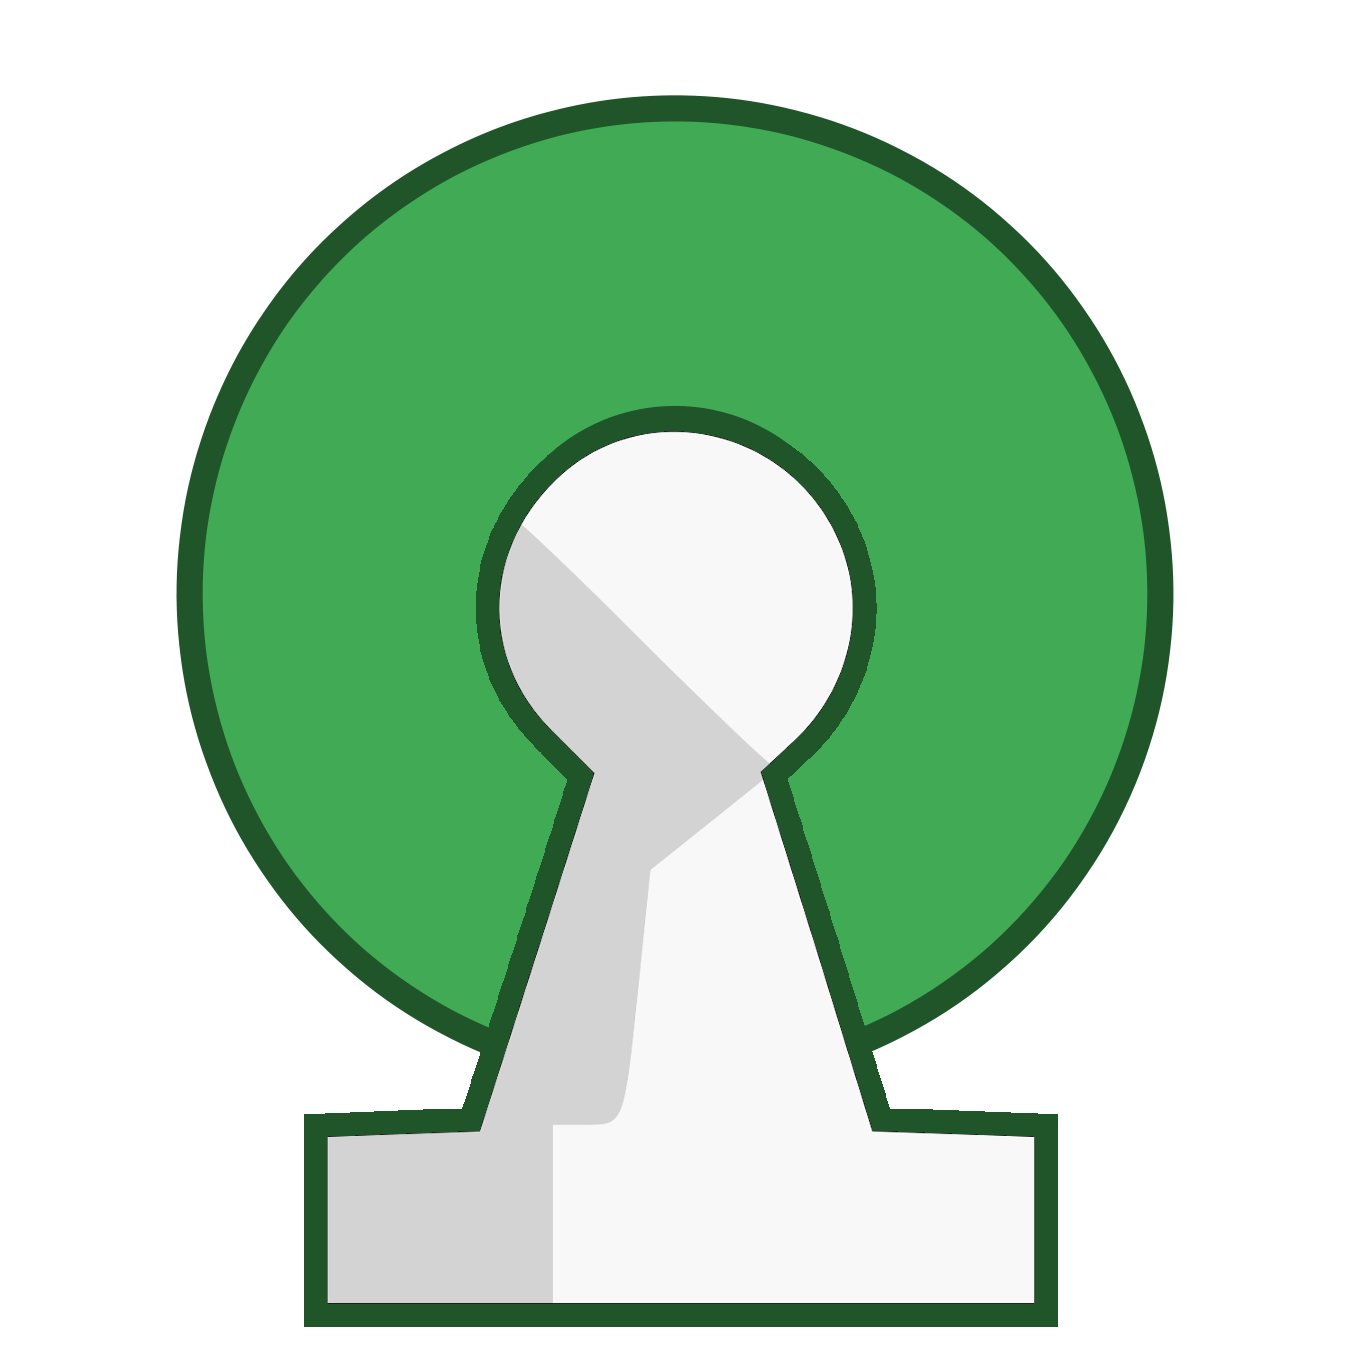 Open Source Chess Engine